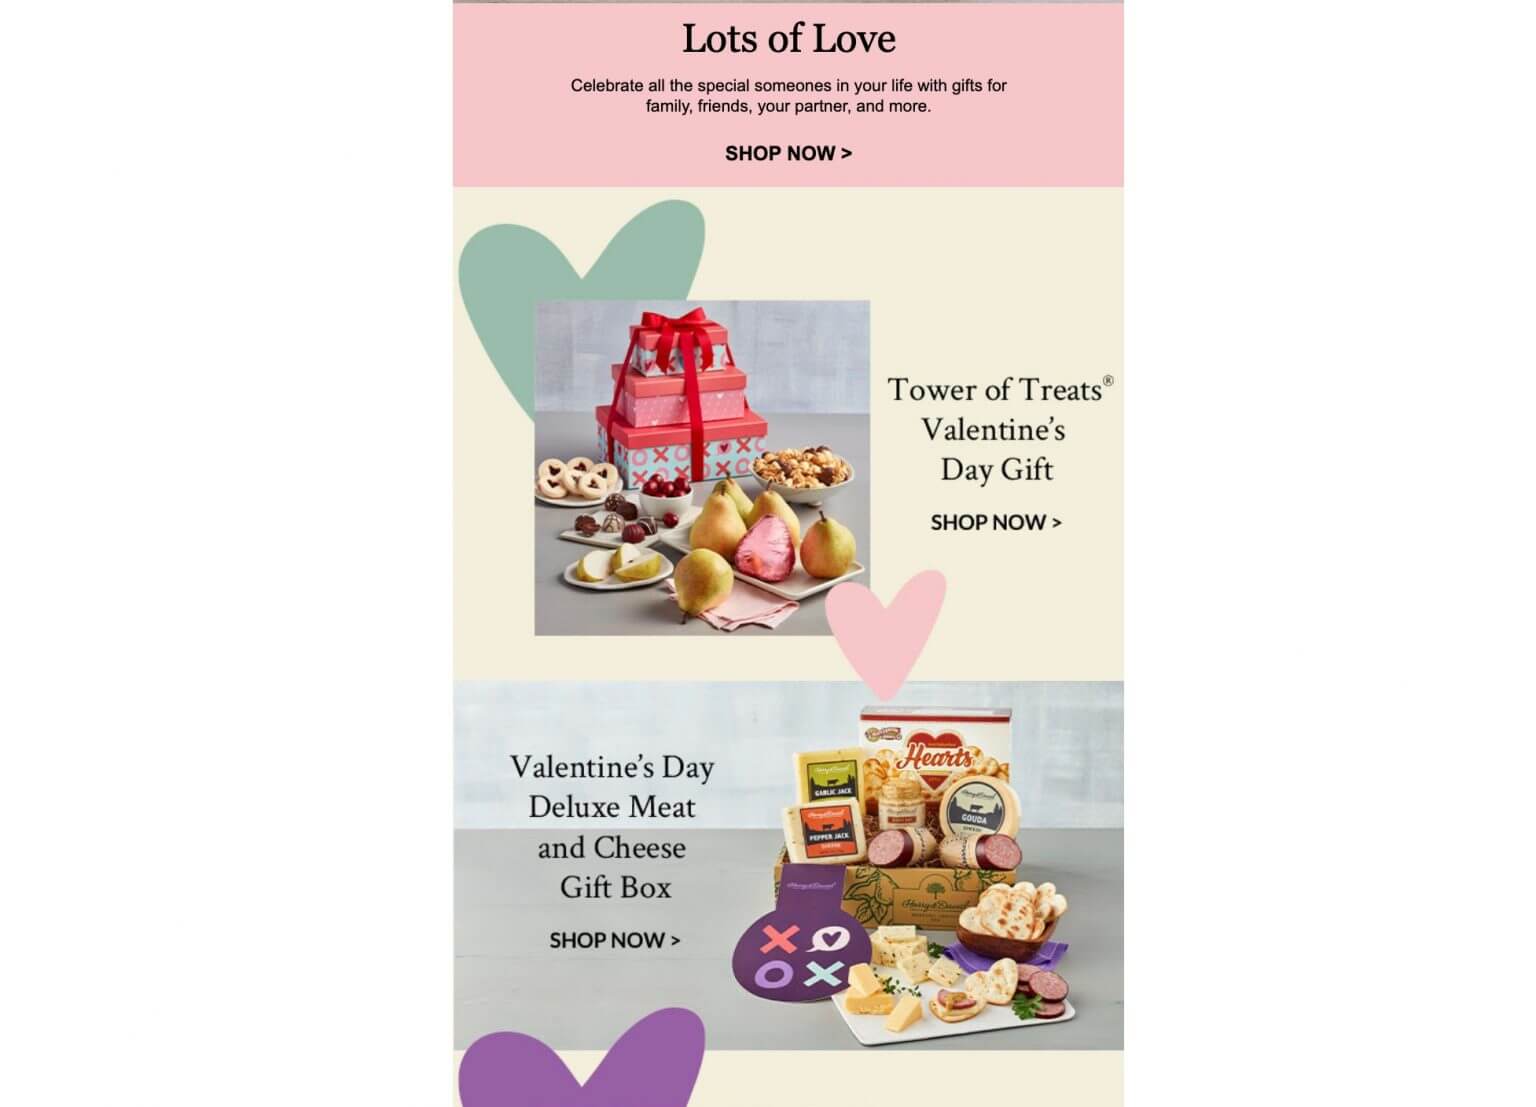 Curated Valentine's Day basket from Harry & David